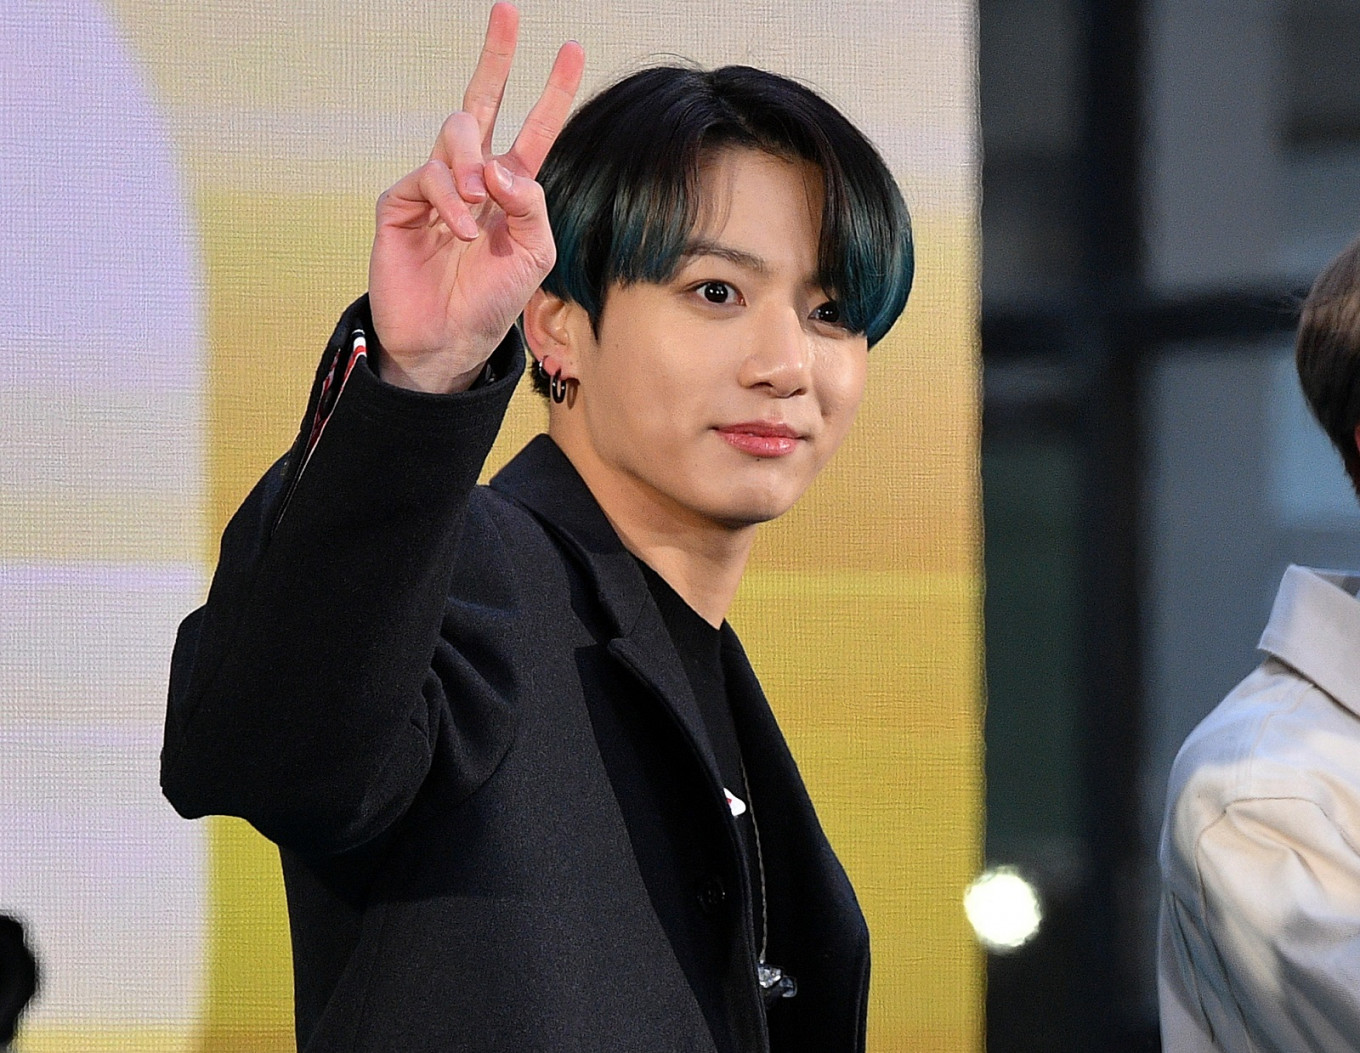 Jungkook Of Bts Sets World Record As First Singer To Hit 10 Billion Views On Tiktok Entertainment The Jakarta Post